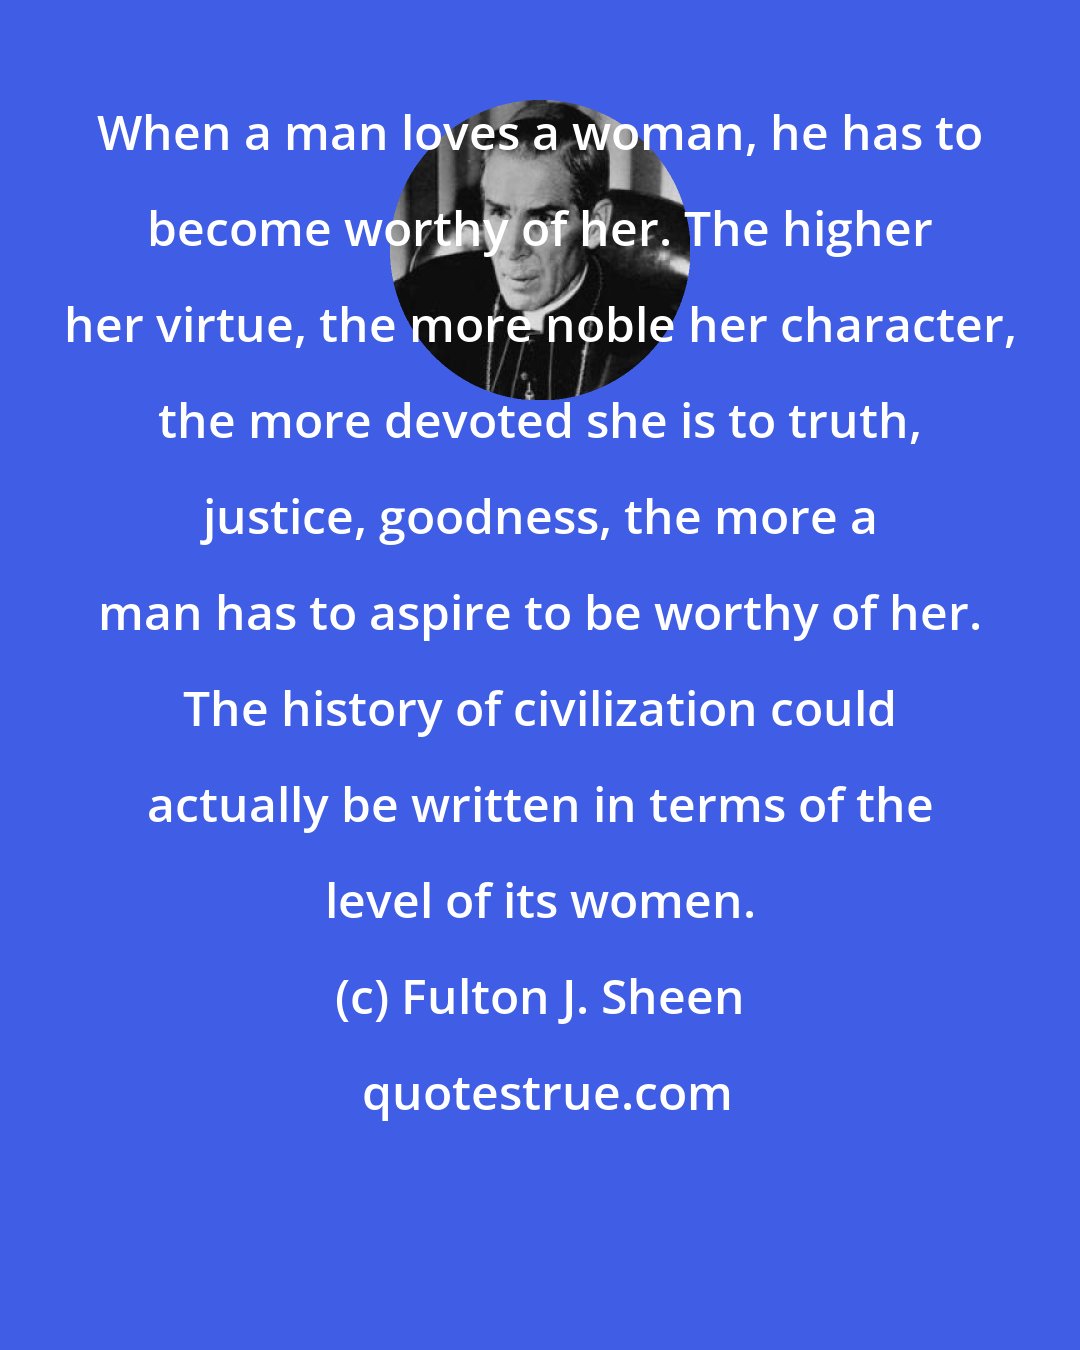 Fulton J. Sheen: When a man loves a woman, he has to become worthy of her. The higher her virtue, the more noble her character, the more devoted she is to truth, justice, goodness, the more a man has to aspire to be worthy of her. The history of civilization could actually be written in terms of the level of its women.